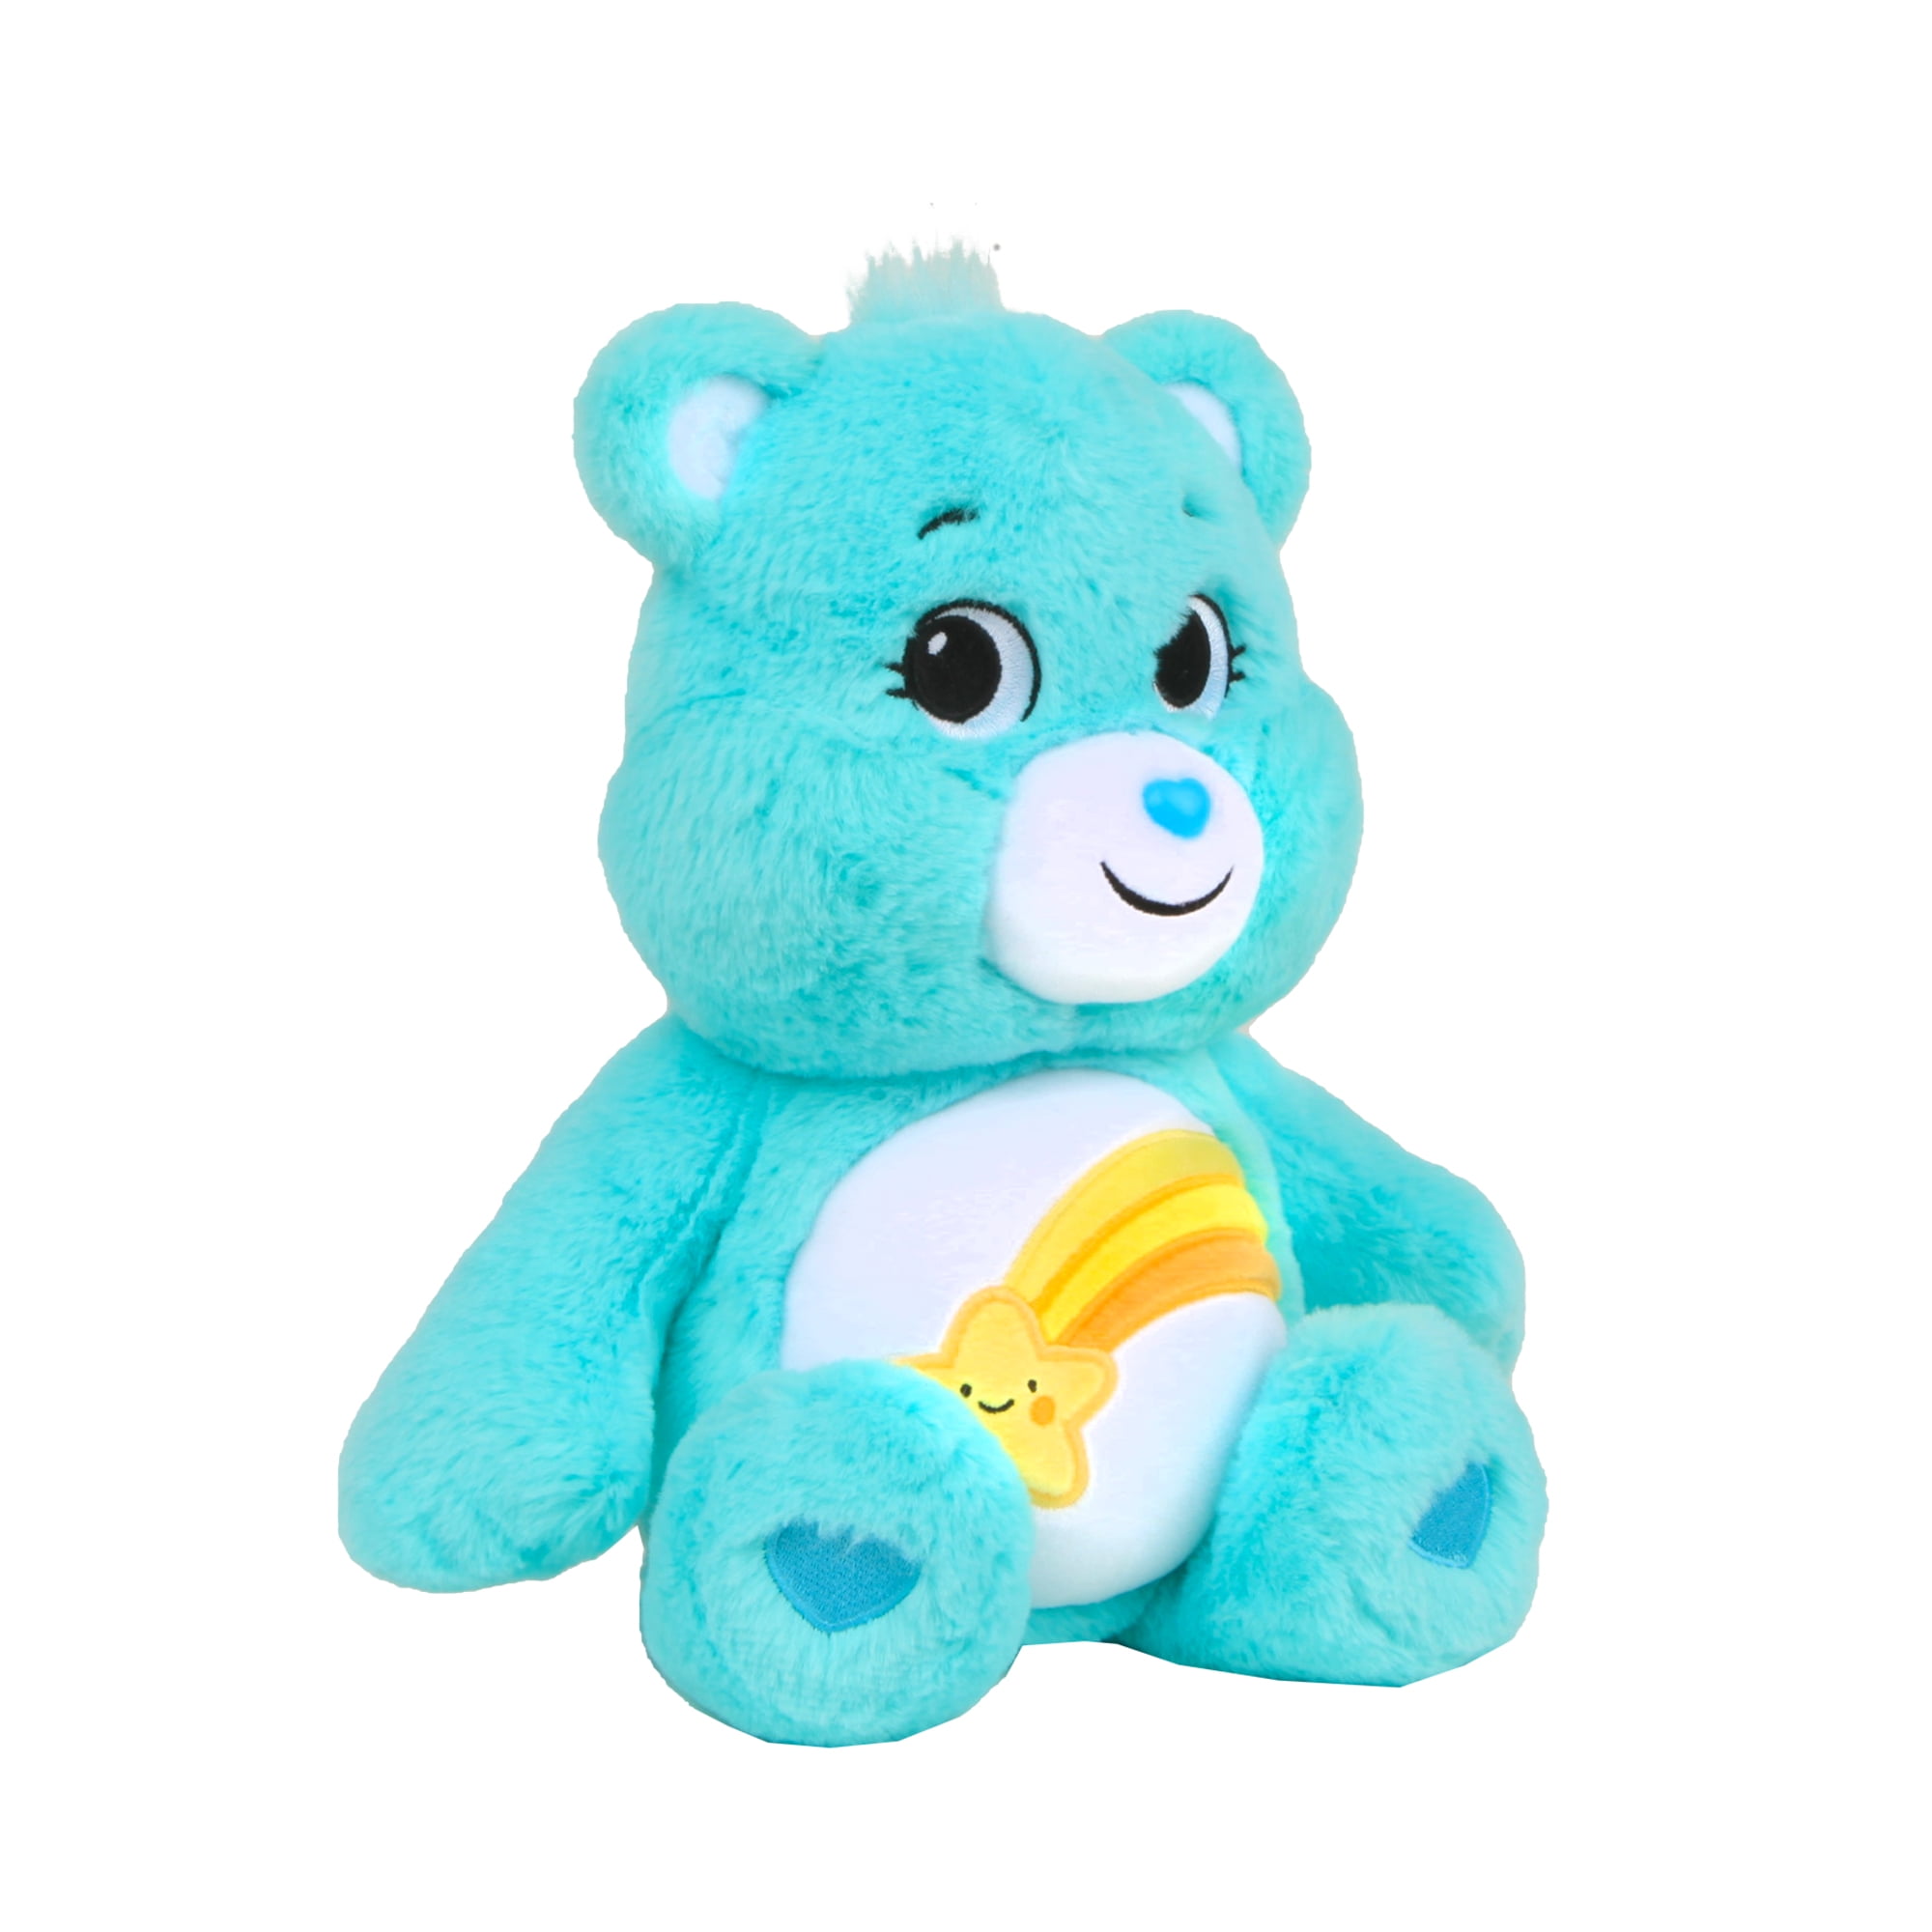 Care Bears 14" Medium Plush Wish Bear With Coin Soft Huggable Material for sale online 